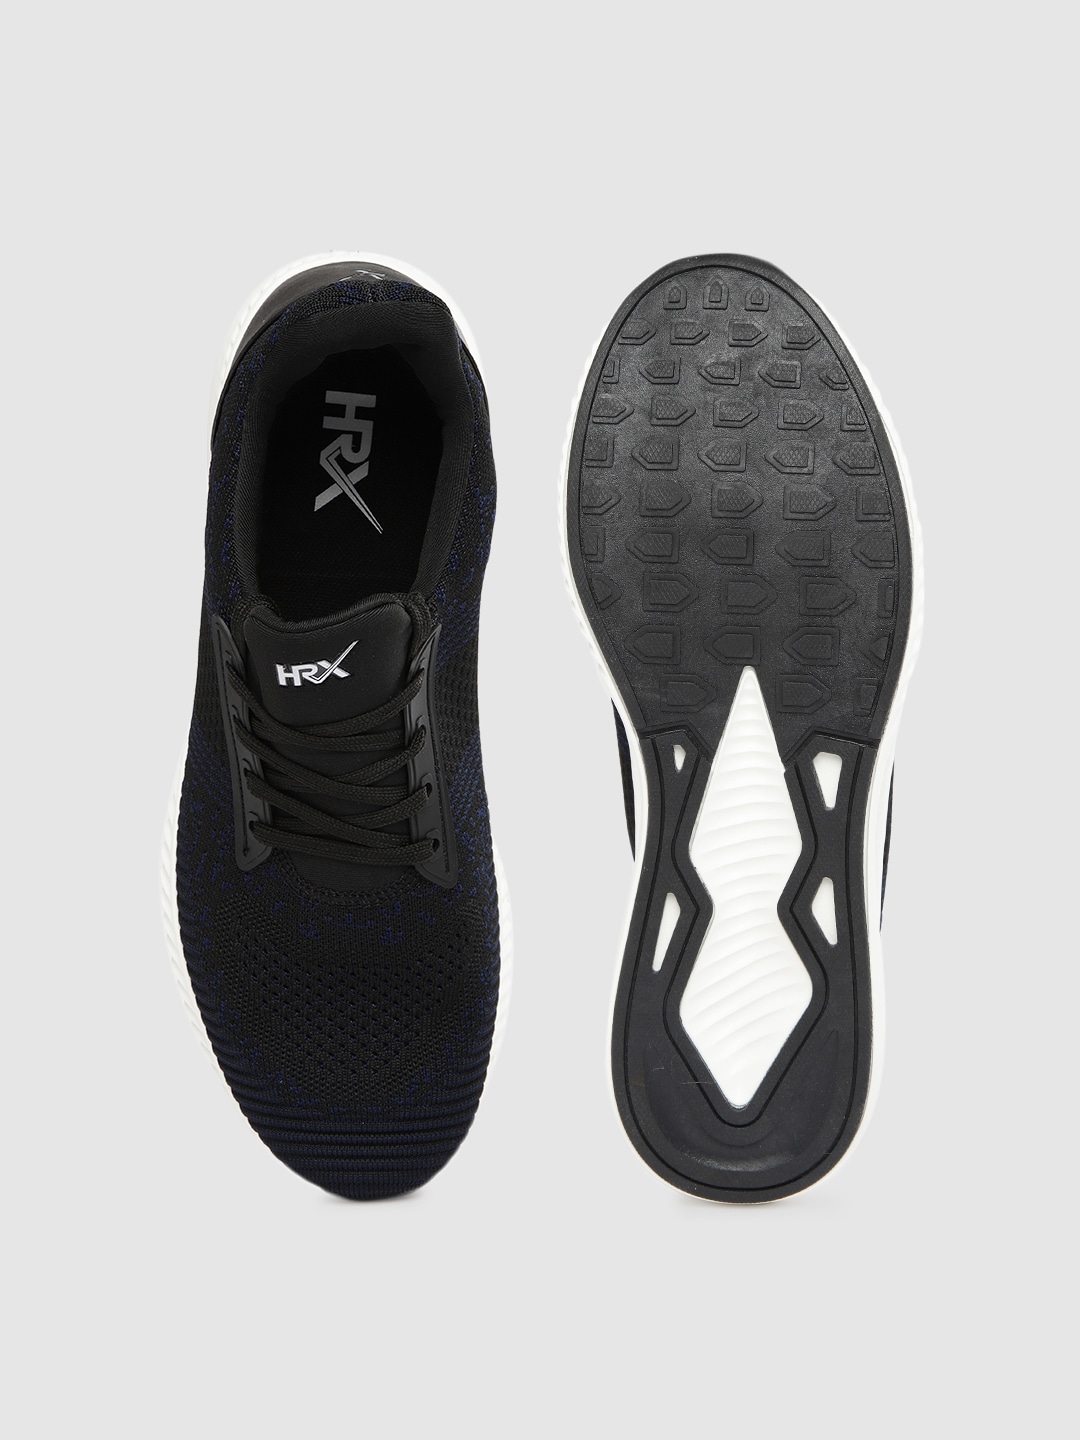 Buy HRX by Hrithik Roshan Men Black Casual Shoes at Amazon.in